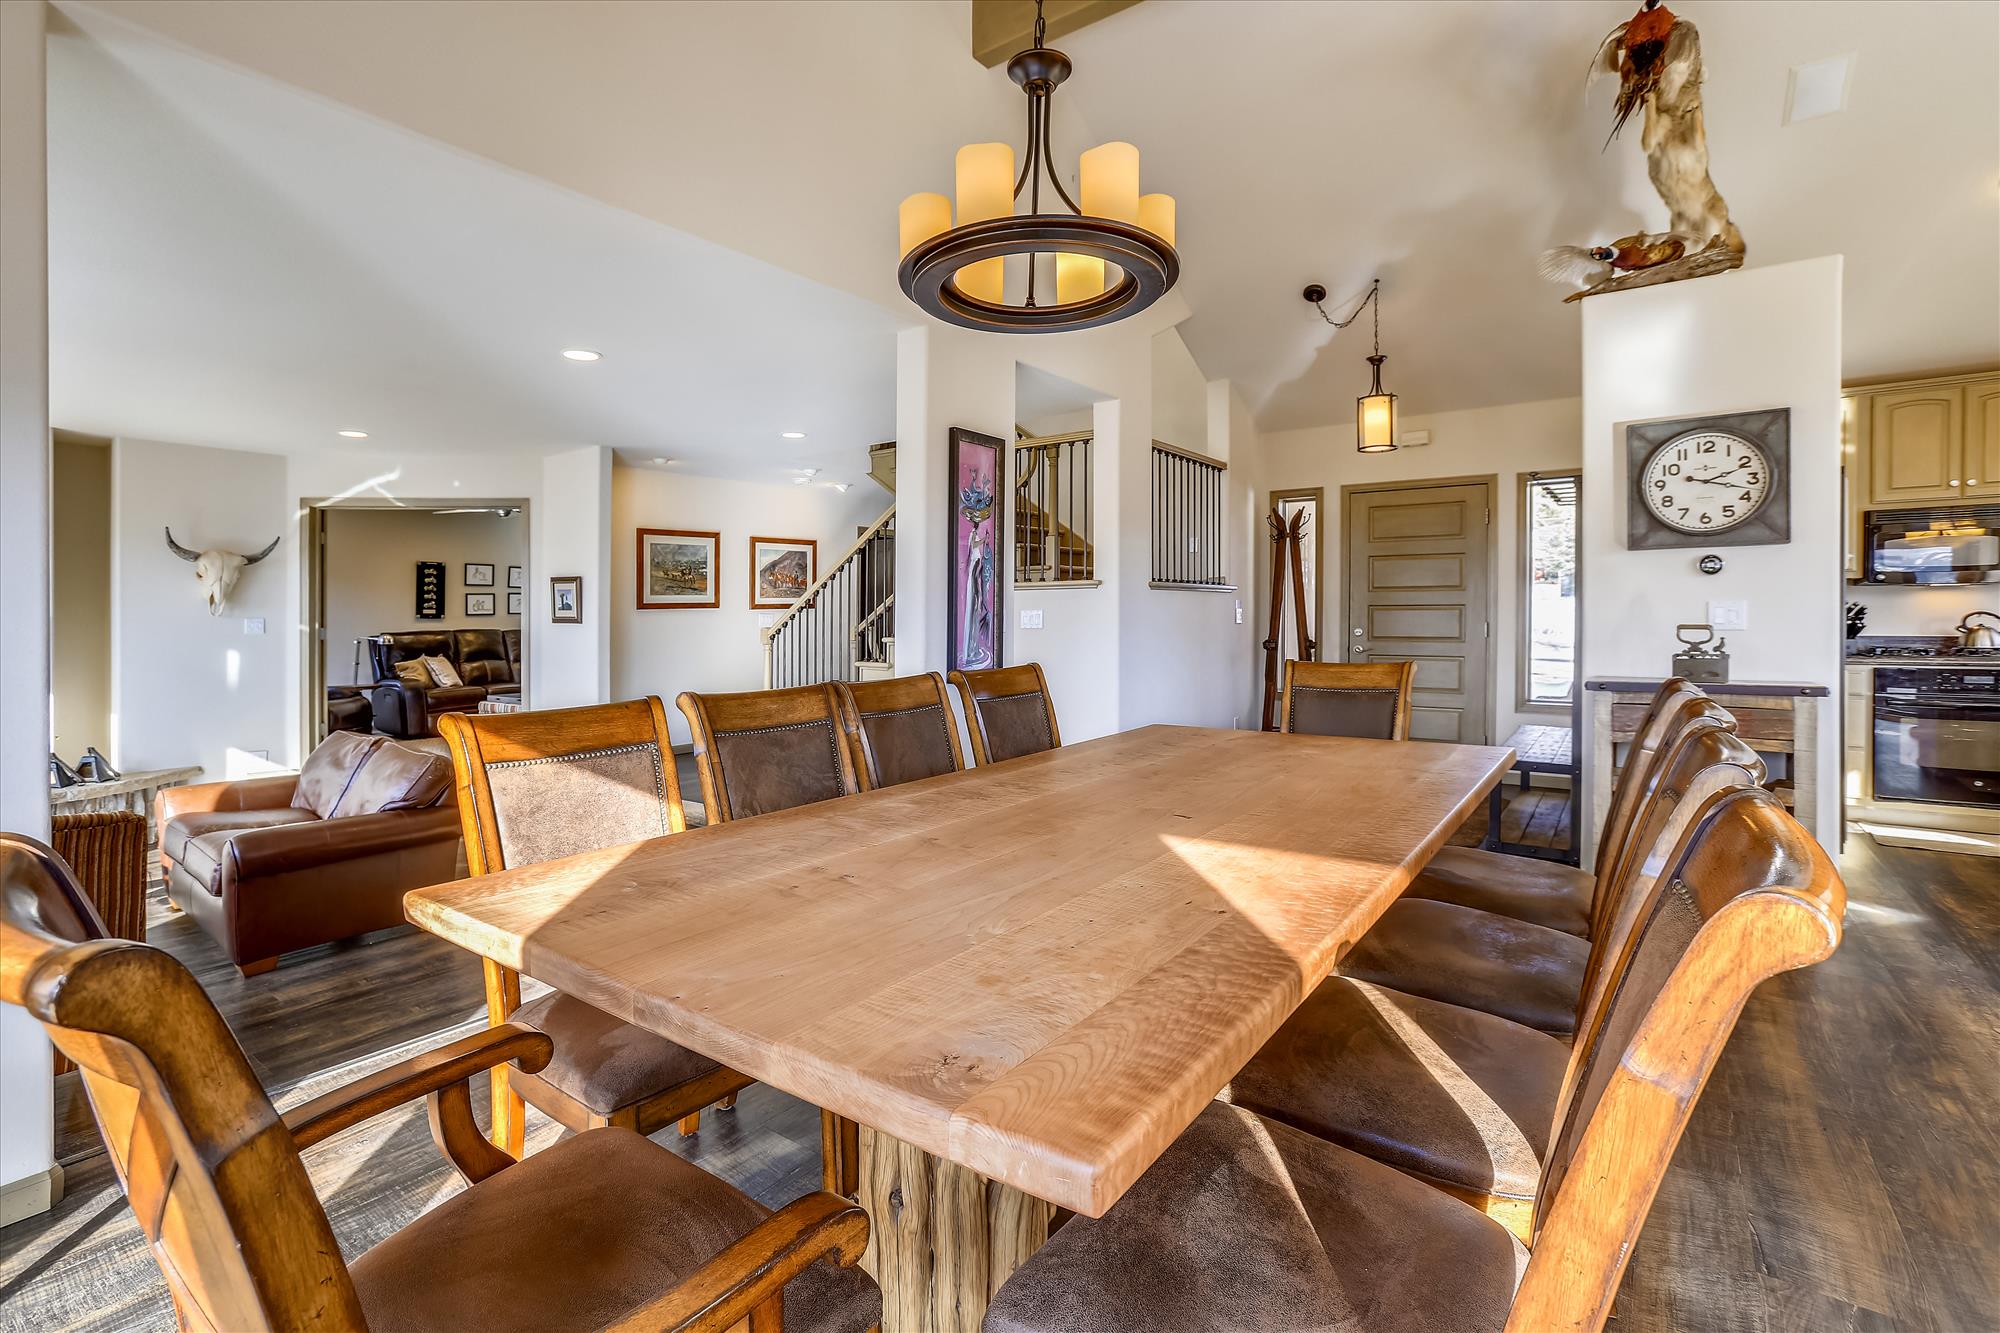 Plenty of space around the dining table for you and your group.